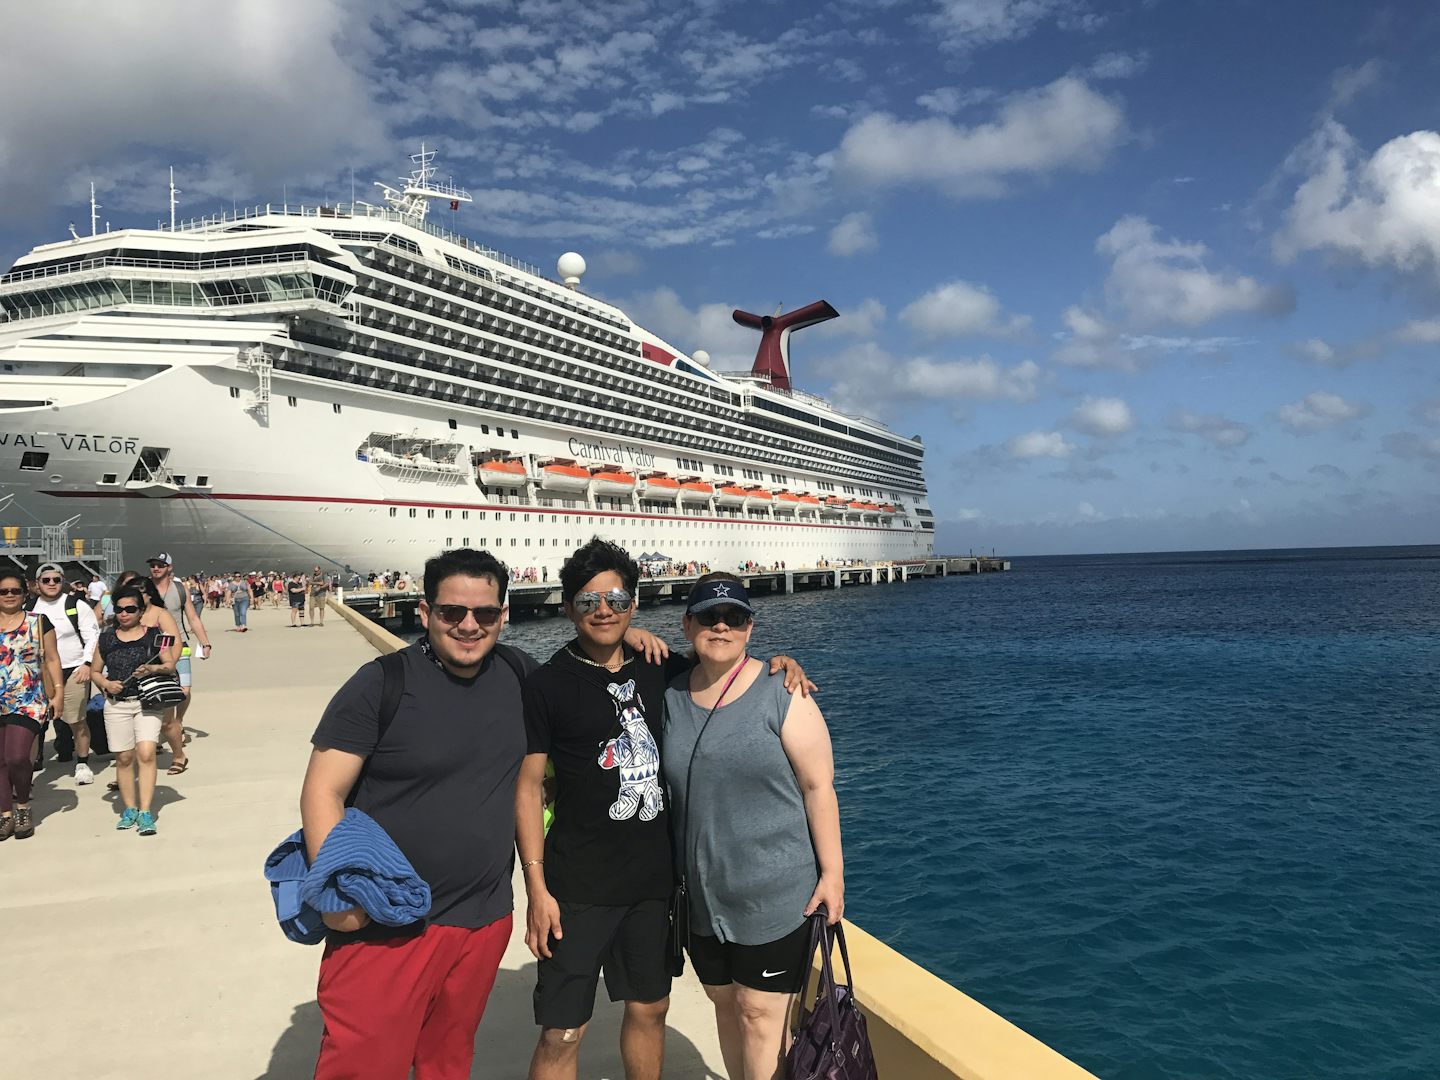 Wife and boys getting off of ship to start our day in Cozumel